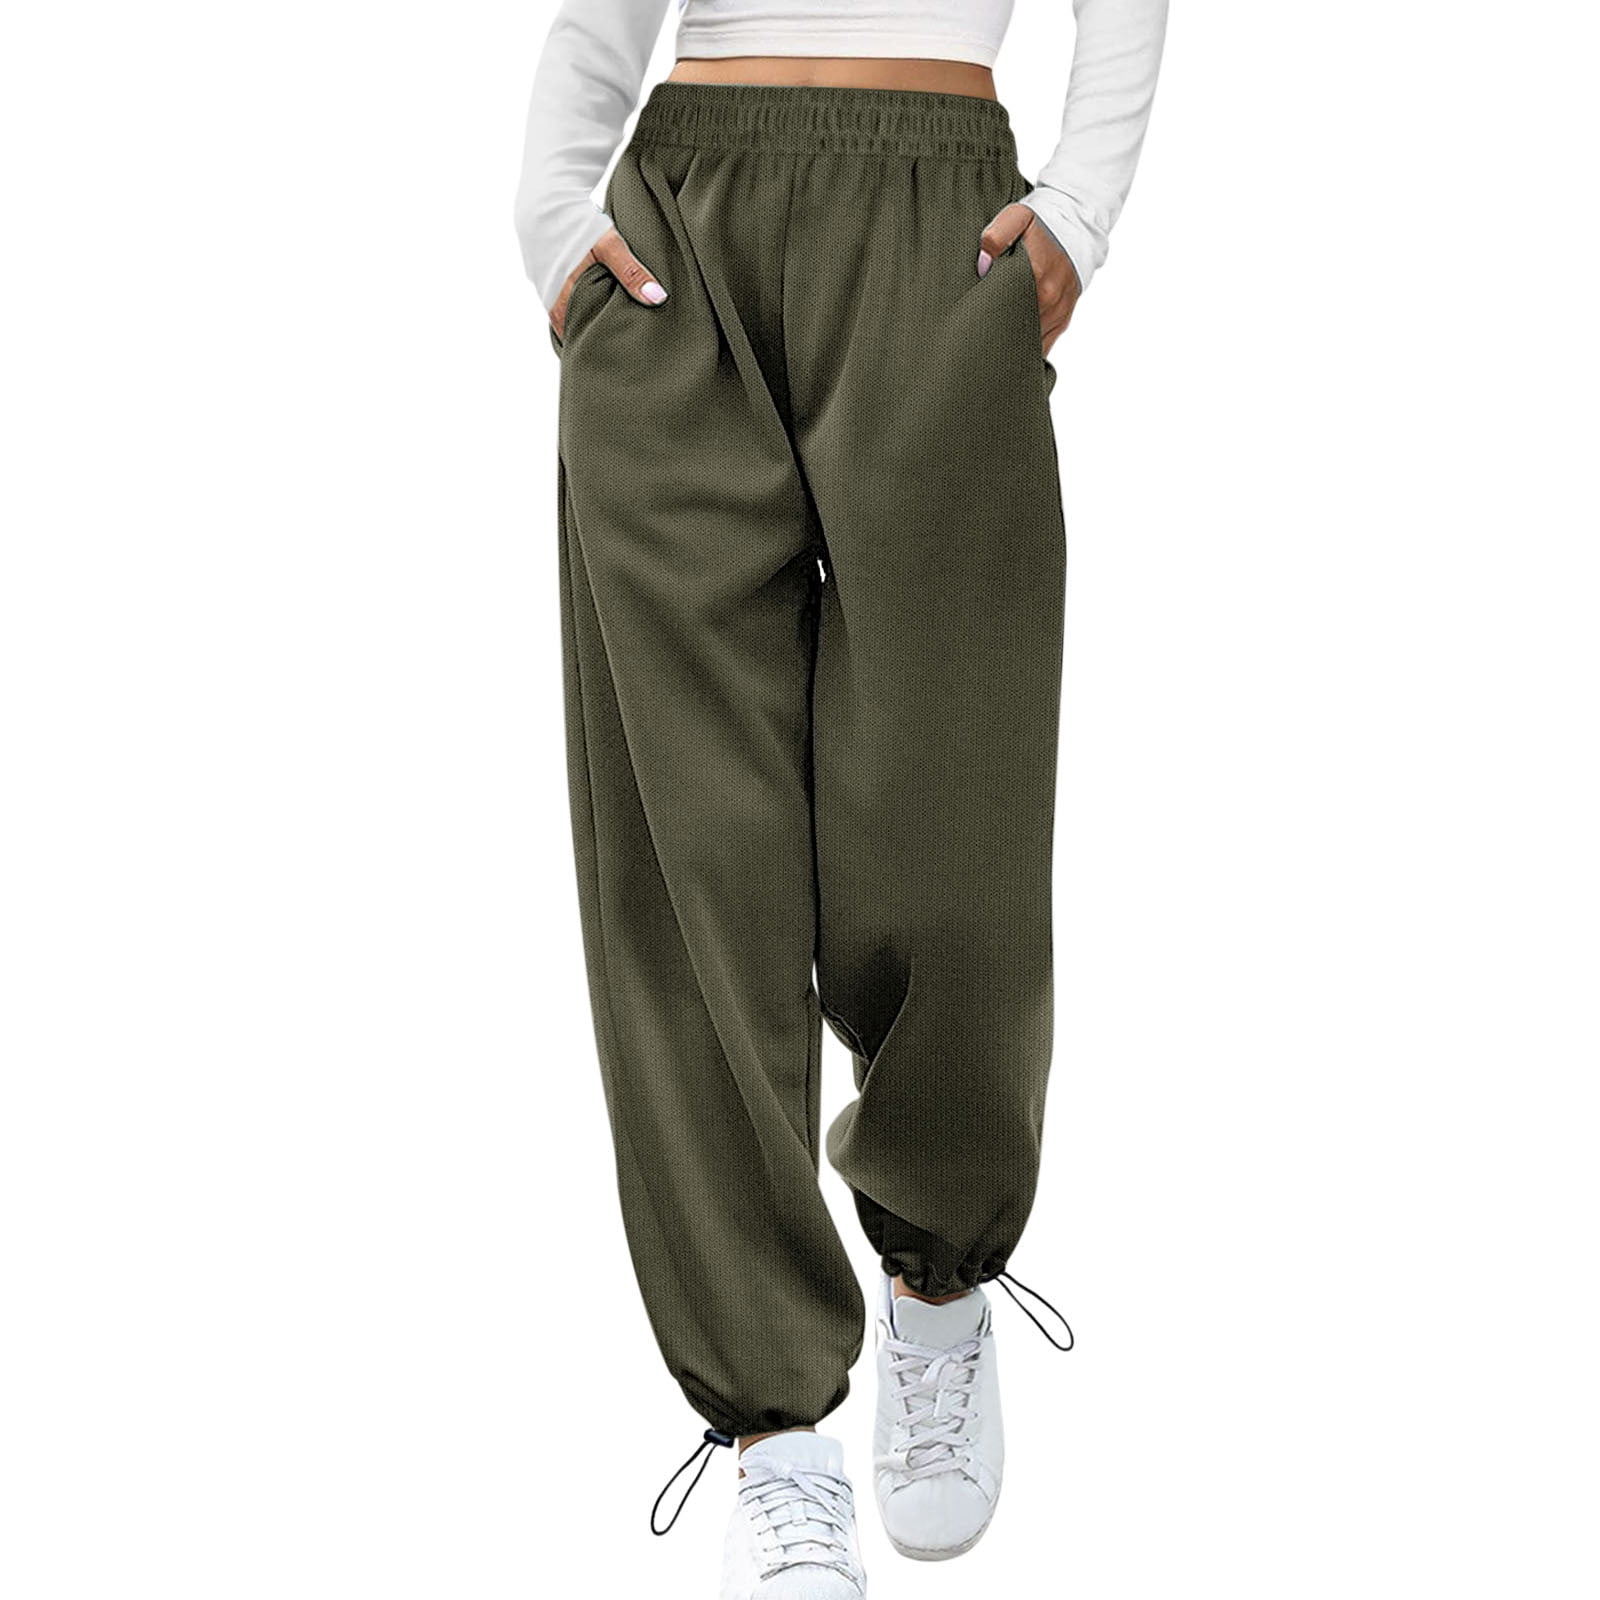 Wide Leg Sweatpants Women Short Wide Leg Baggy High Waisted Joggers  Trousers With Pockets Drawstring Track Pants 